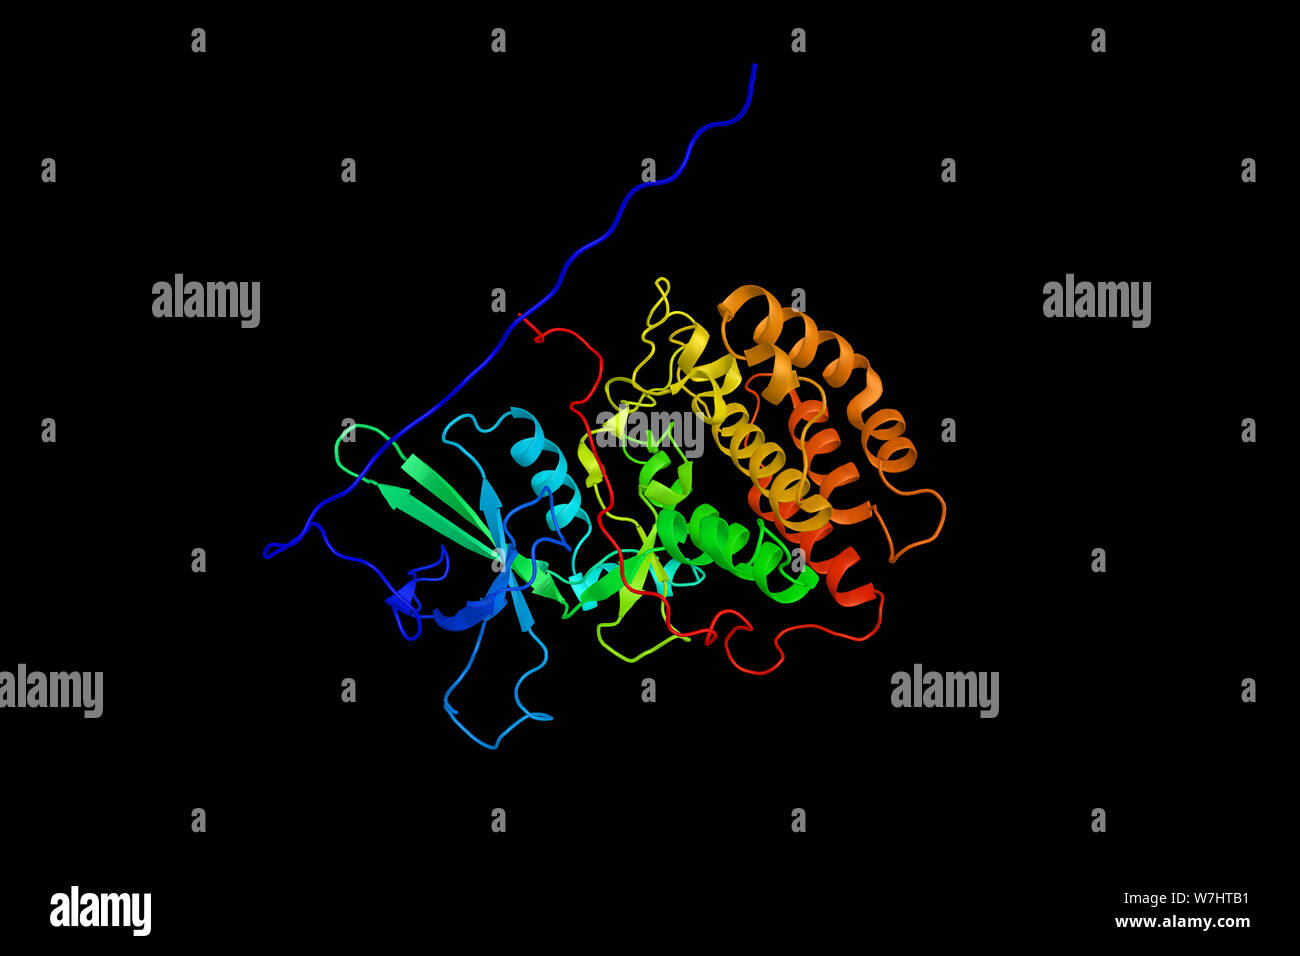 Serine/threonine-protein kinase VRK1, a protein which localizes to the nucleus and has been shown to promote the stability and nuclear accumulation of Stock Photo